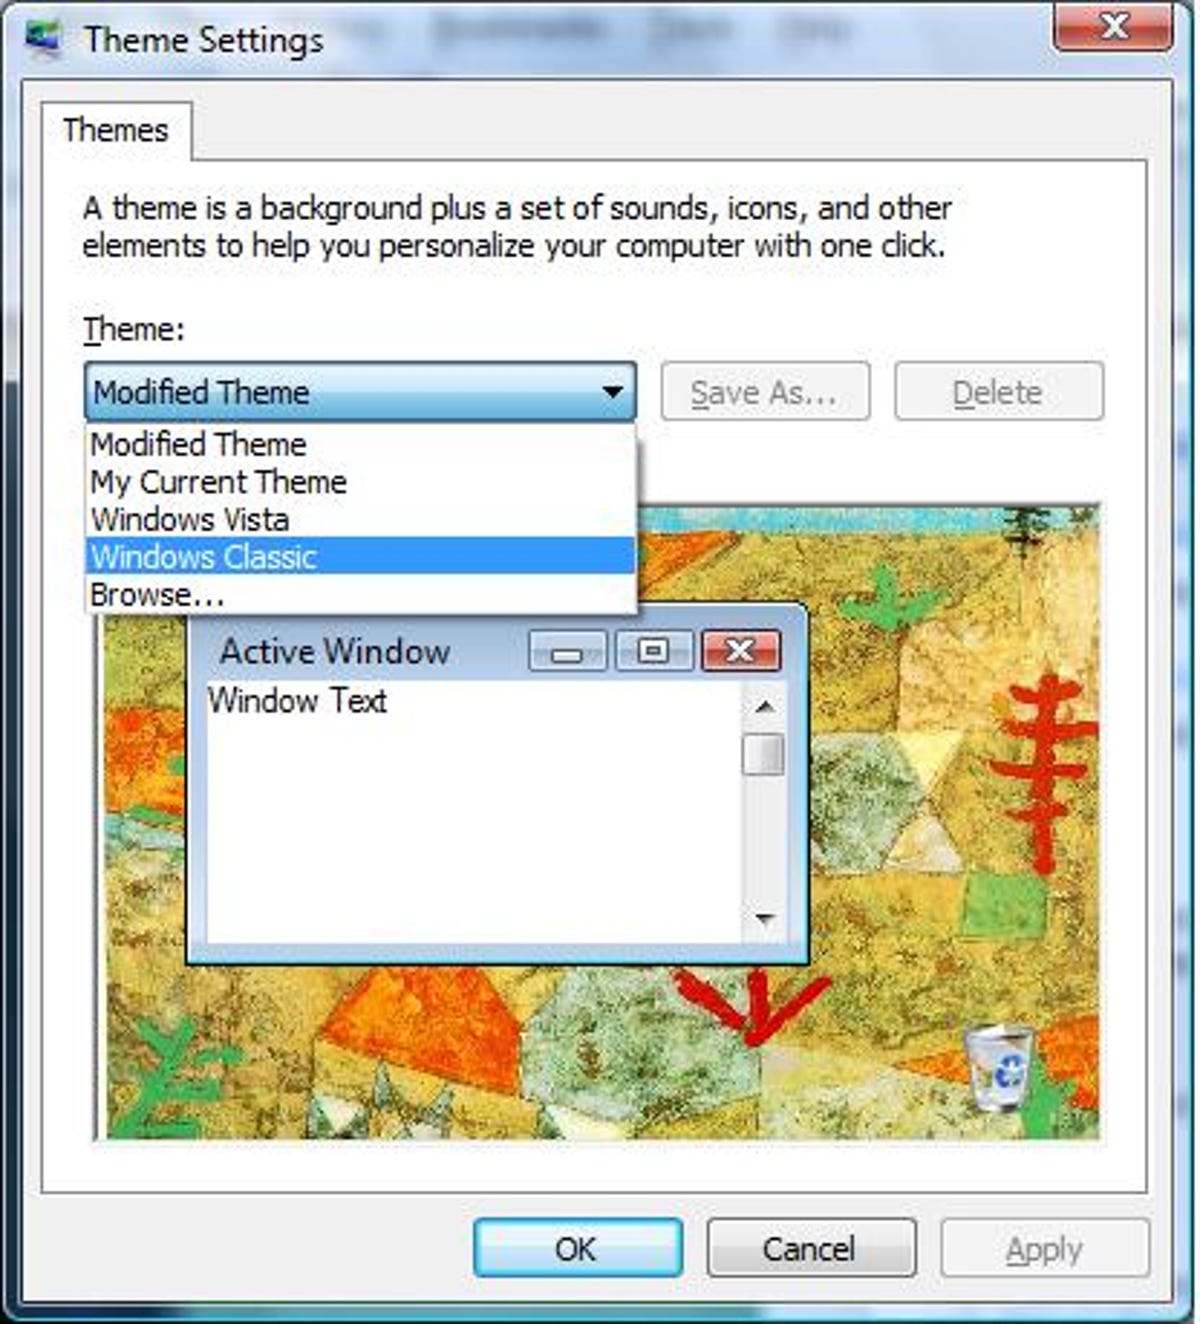 The Themes options in Windows Vista's Personalization dialog box